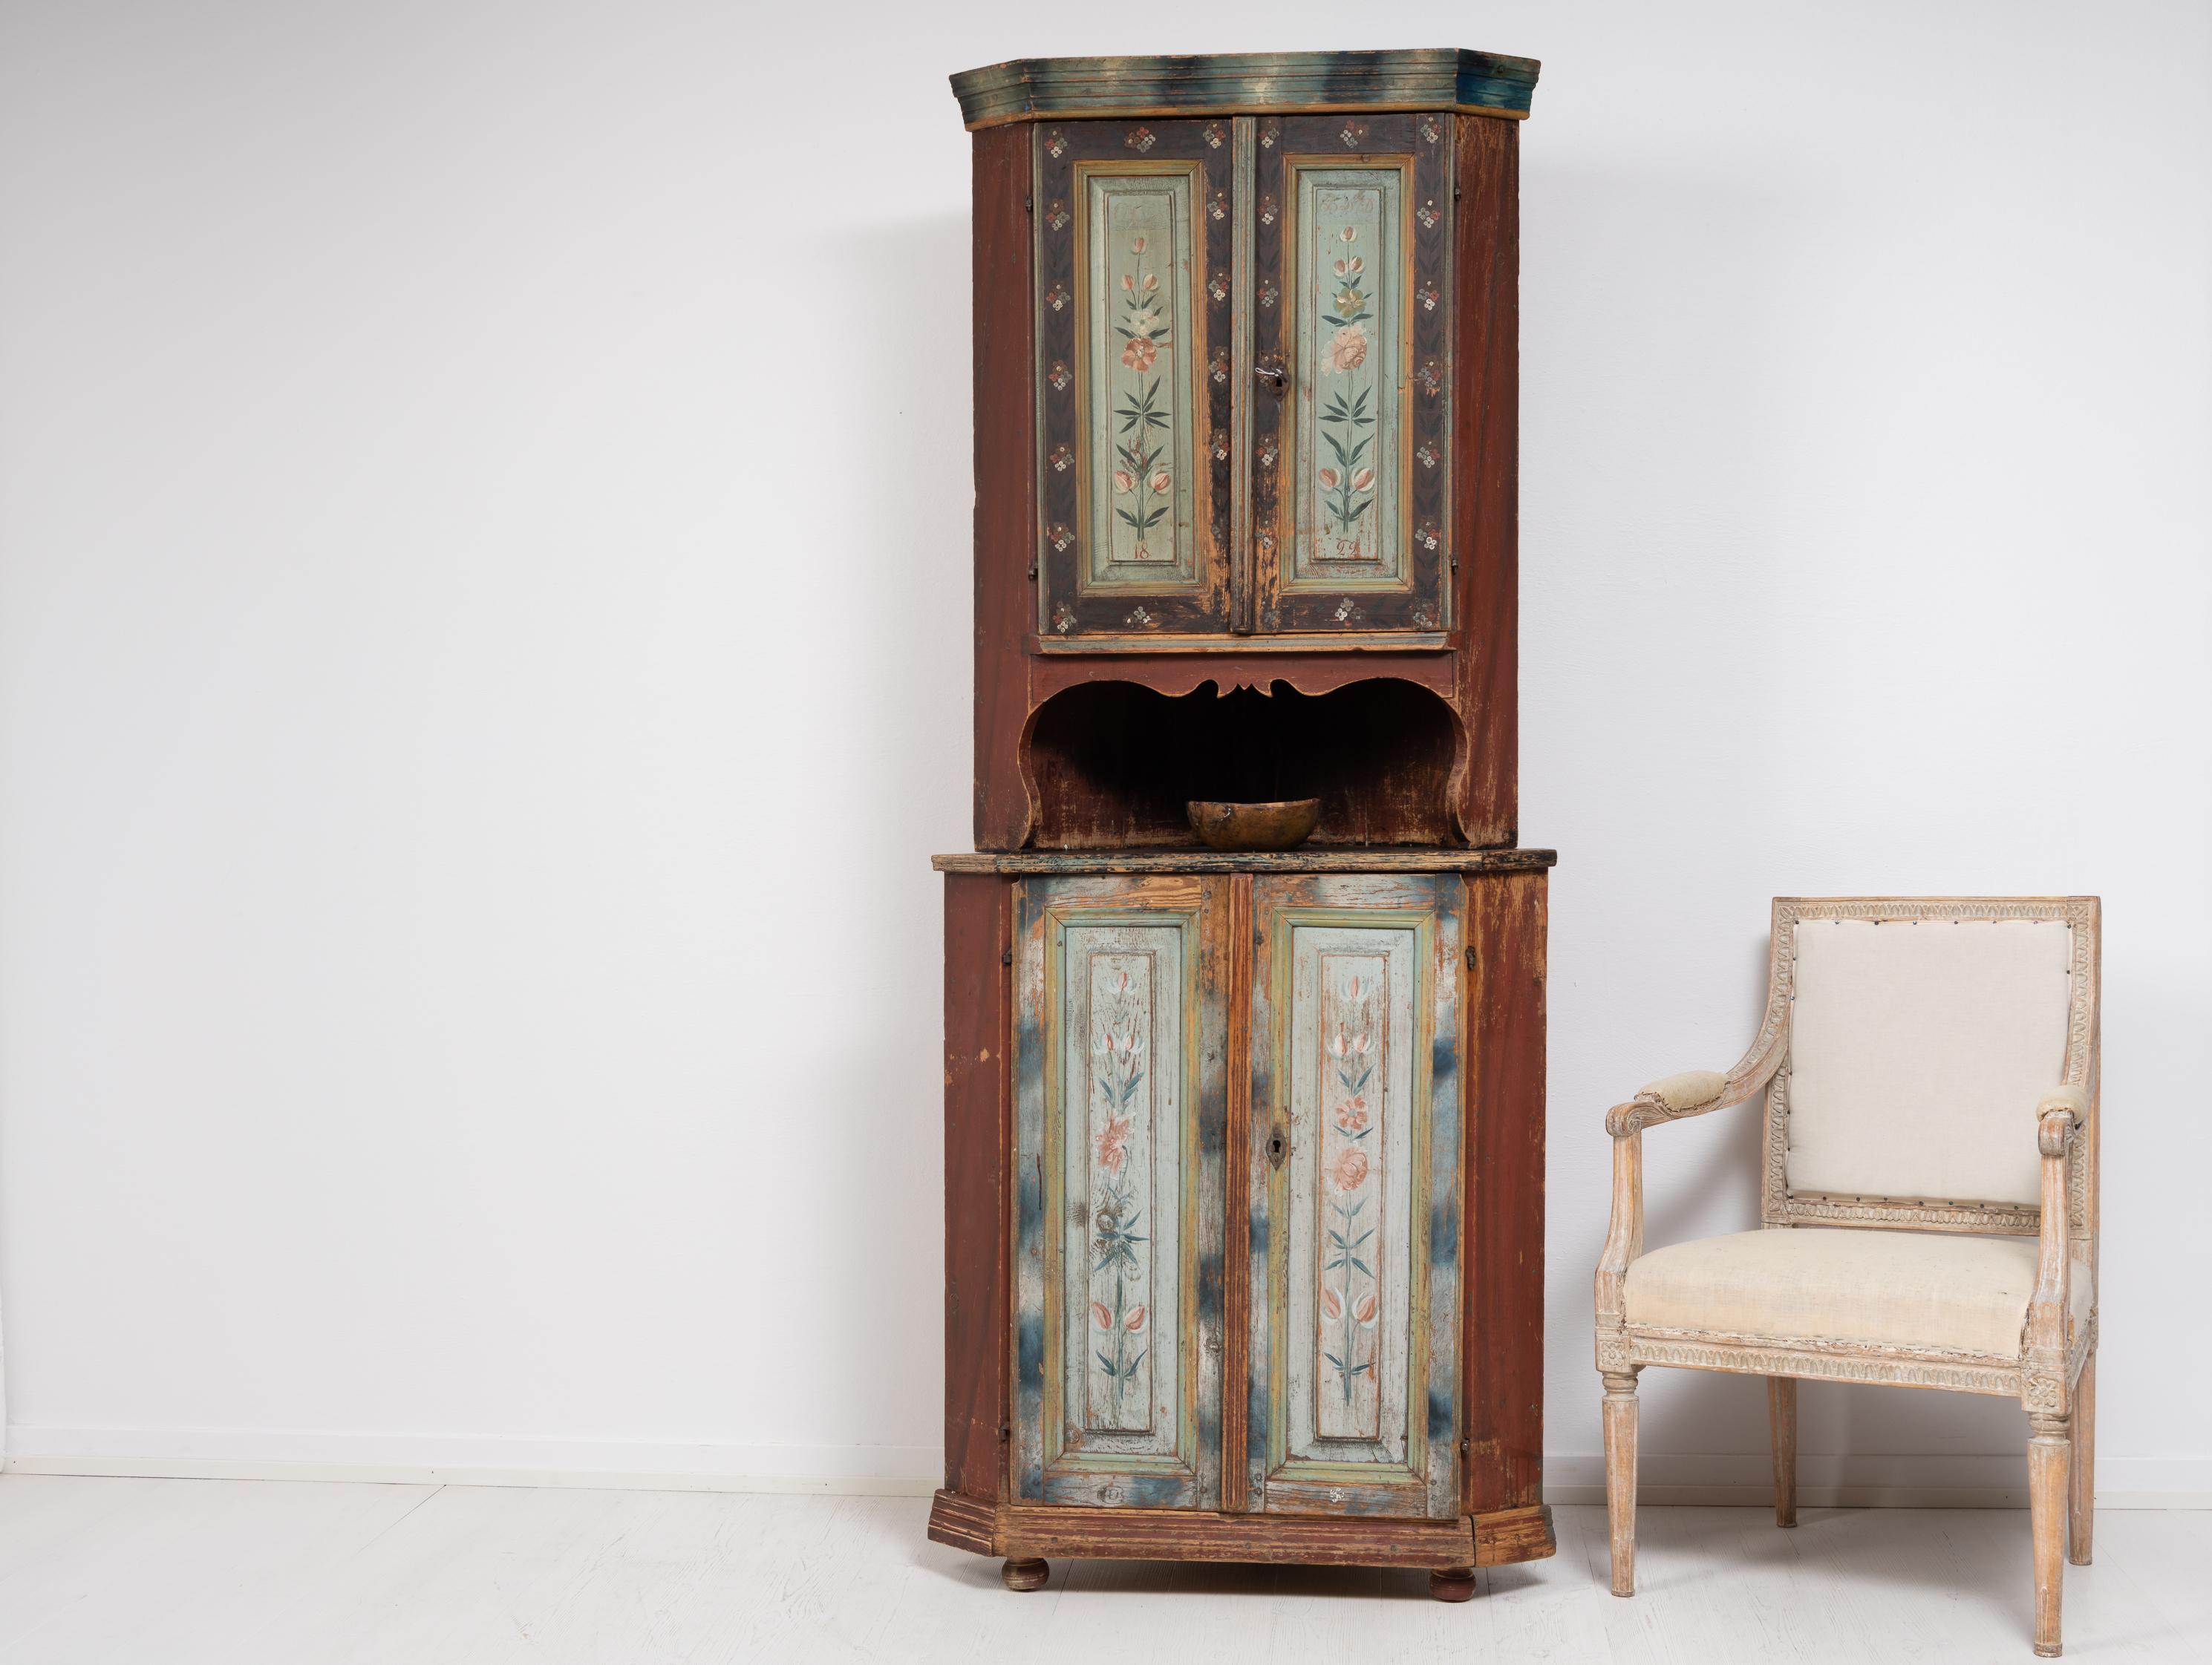 Rare corner cabinet from northern Sweden made during the first years of the 19th century, 1810 to 1820. The cabinet is pine and made in two parts. It has the original decoration paint with the authentic patina of time. The paint is unusually